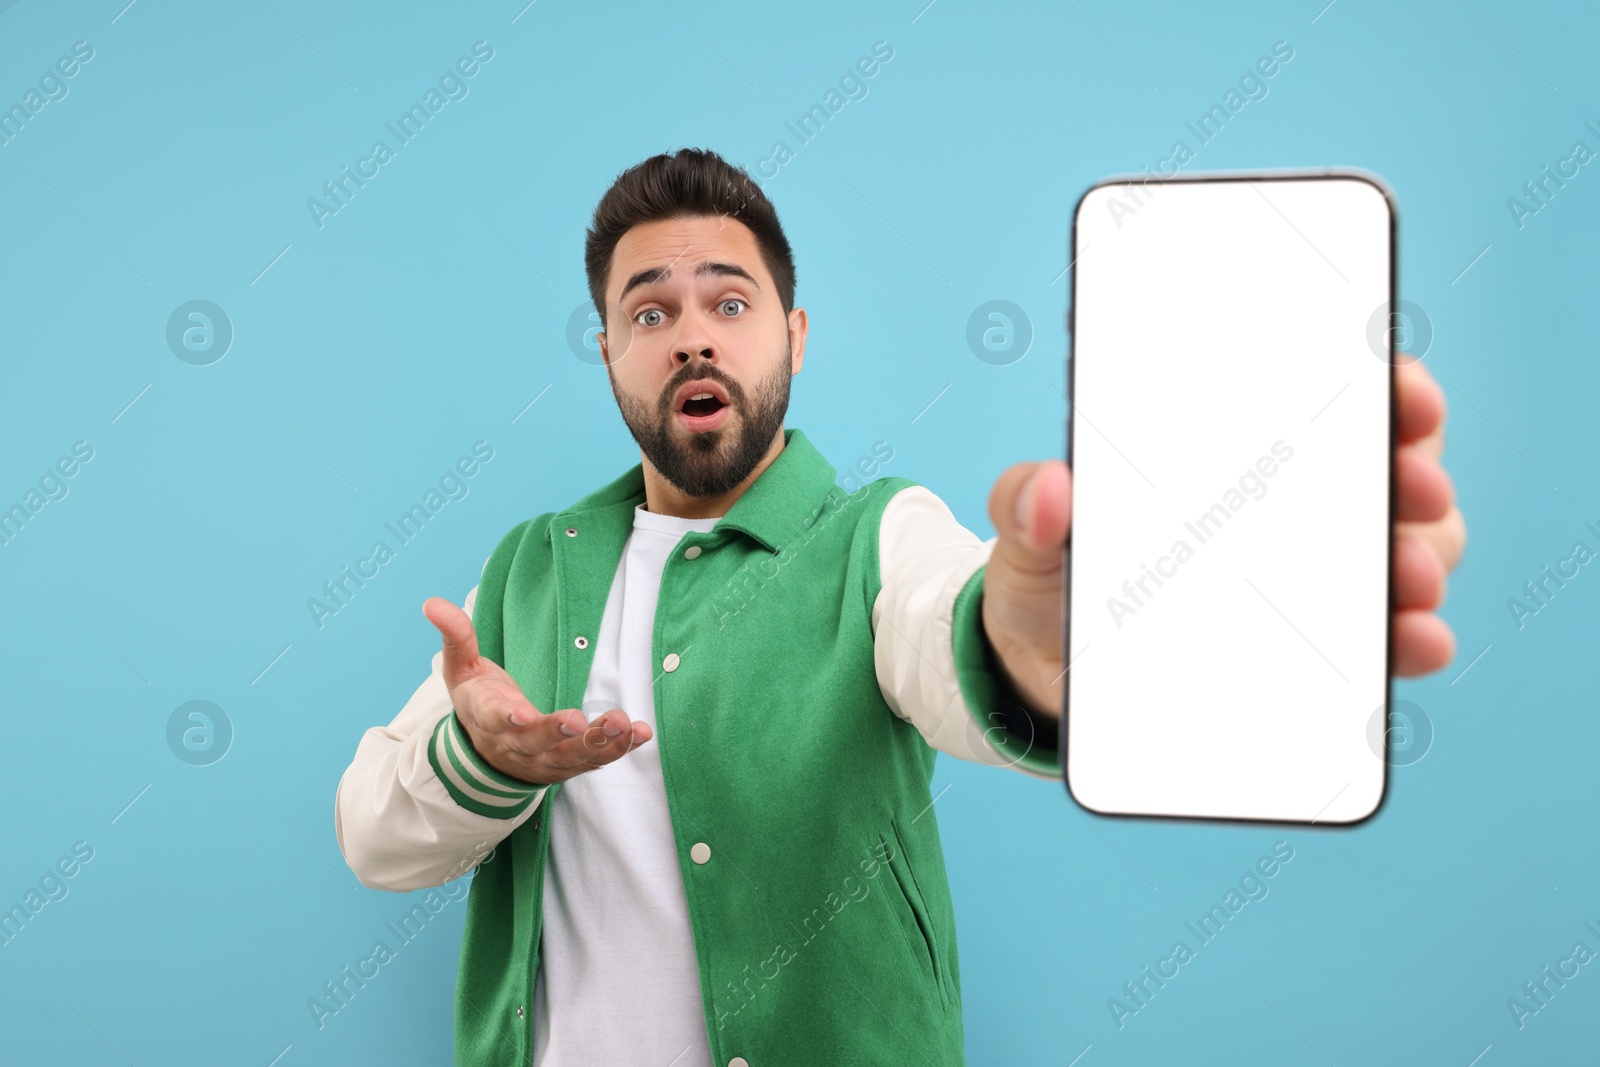 Photo of Surprised man showing smartphone in hand on light blue background